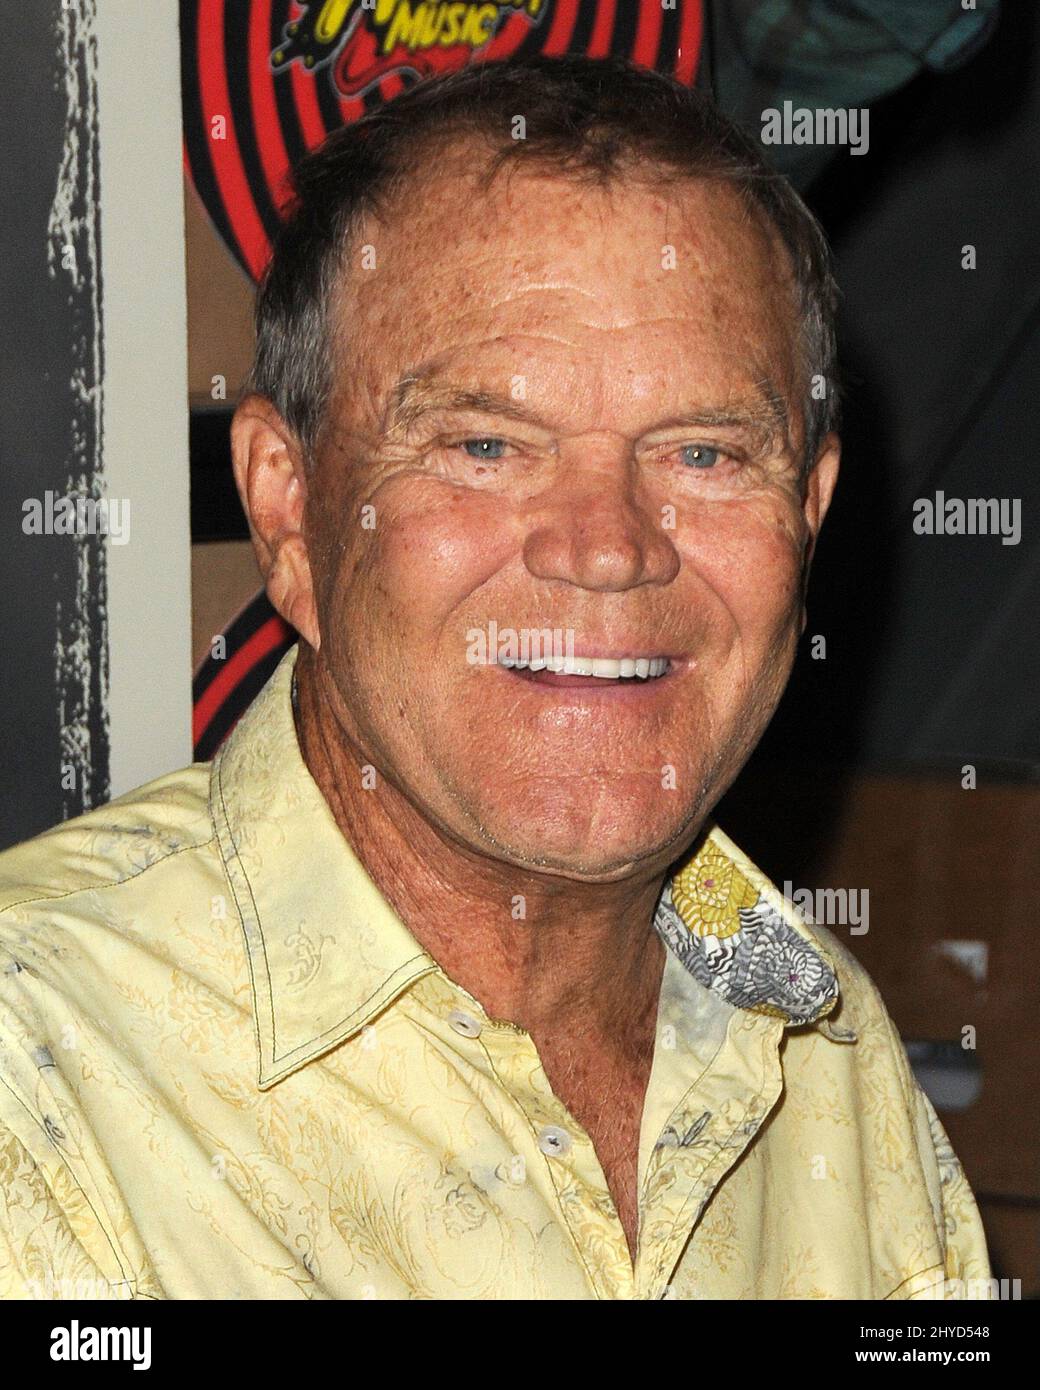 6 septembre 2011 Hollywood, ca. Glen Campbell Glen Campbell 'Ghost on the Canvas' CD de signature à Amoeba Music Banque D'Images